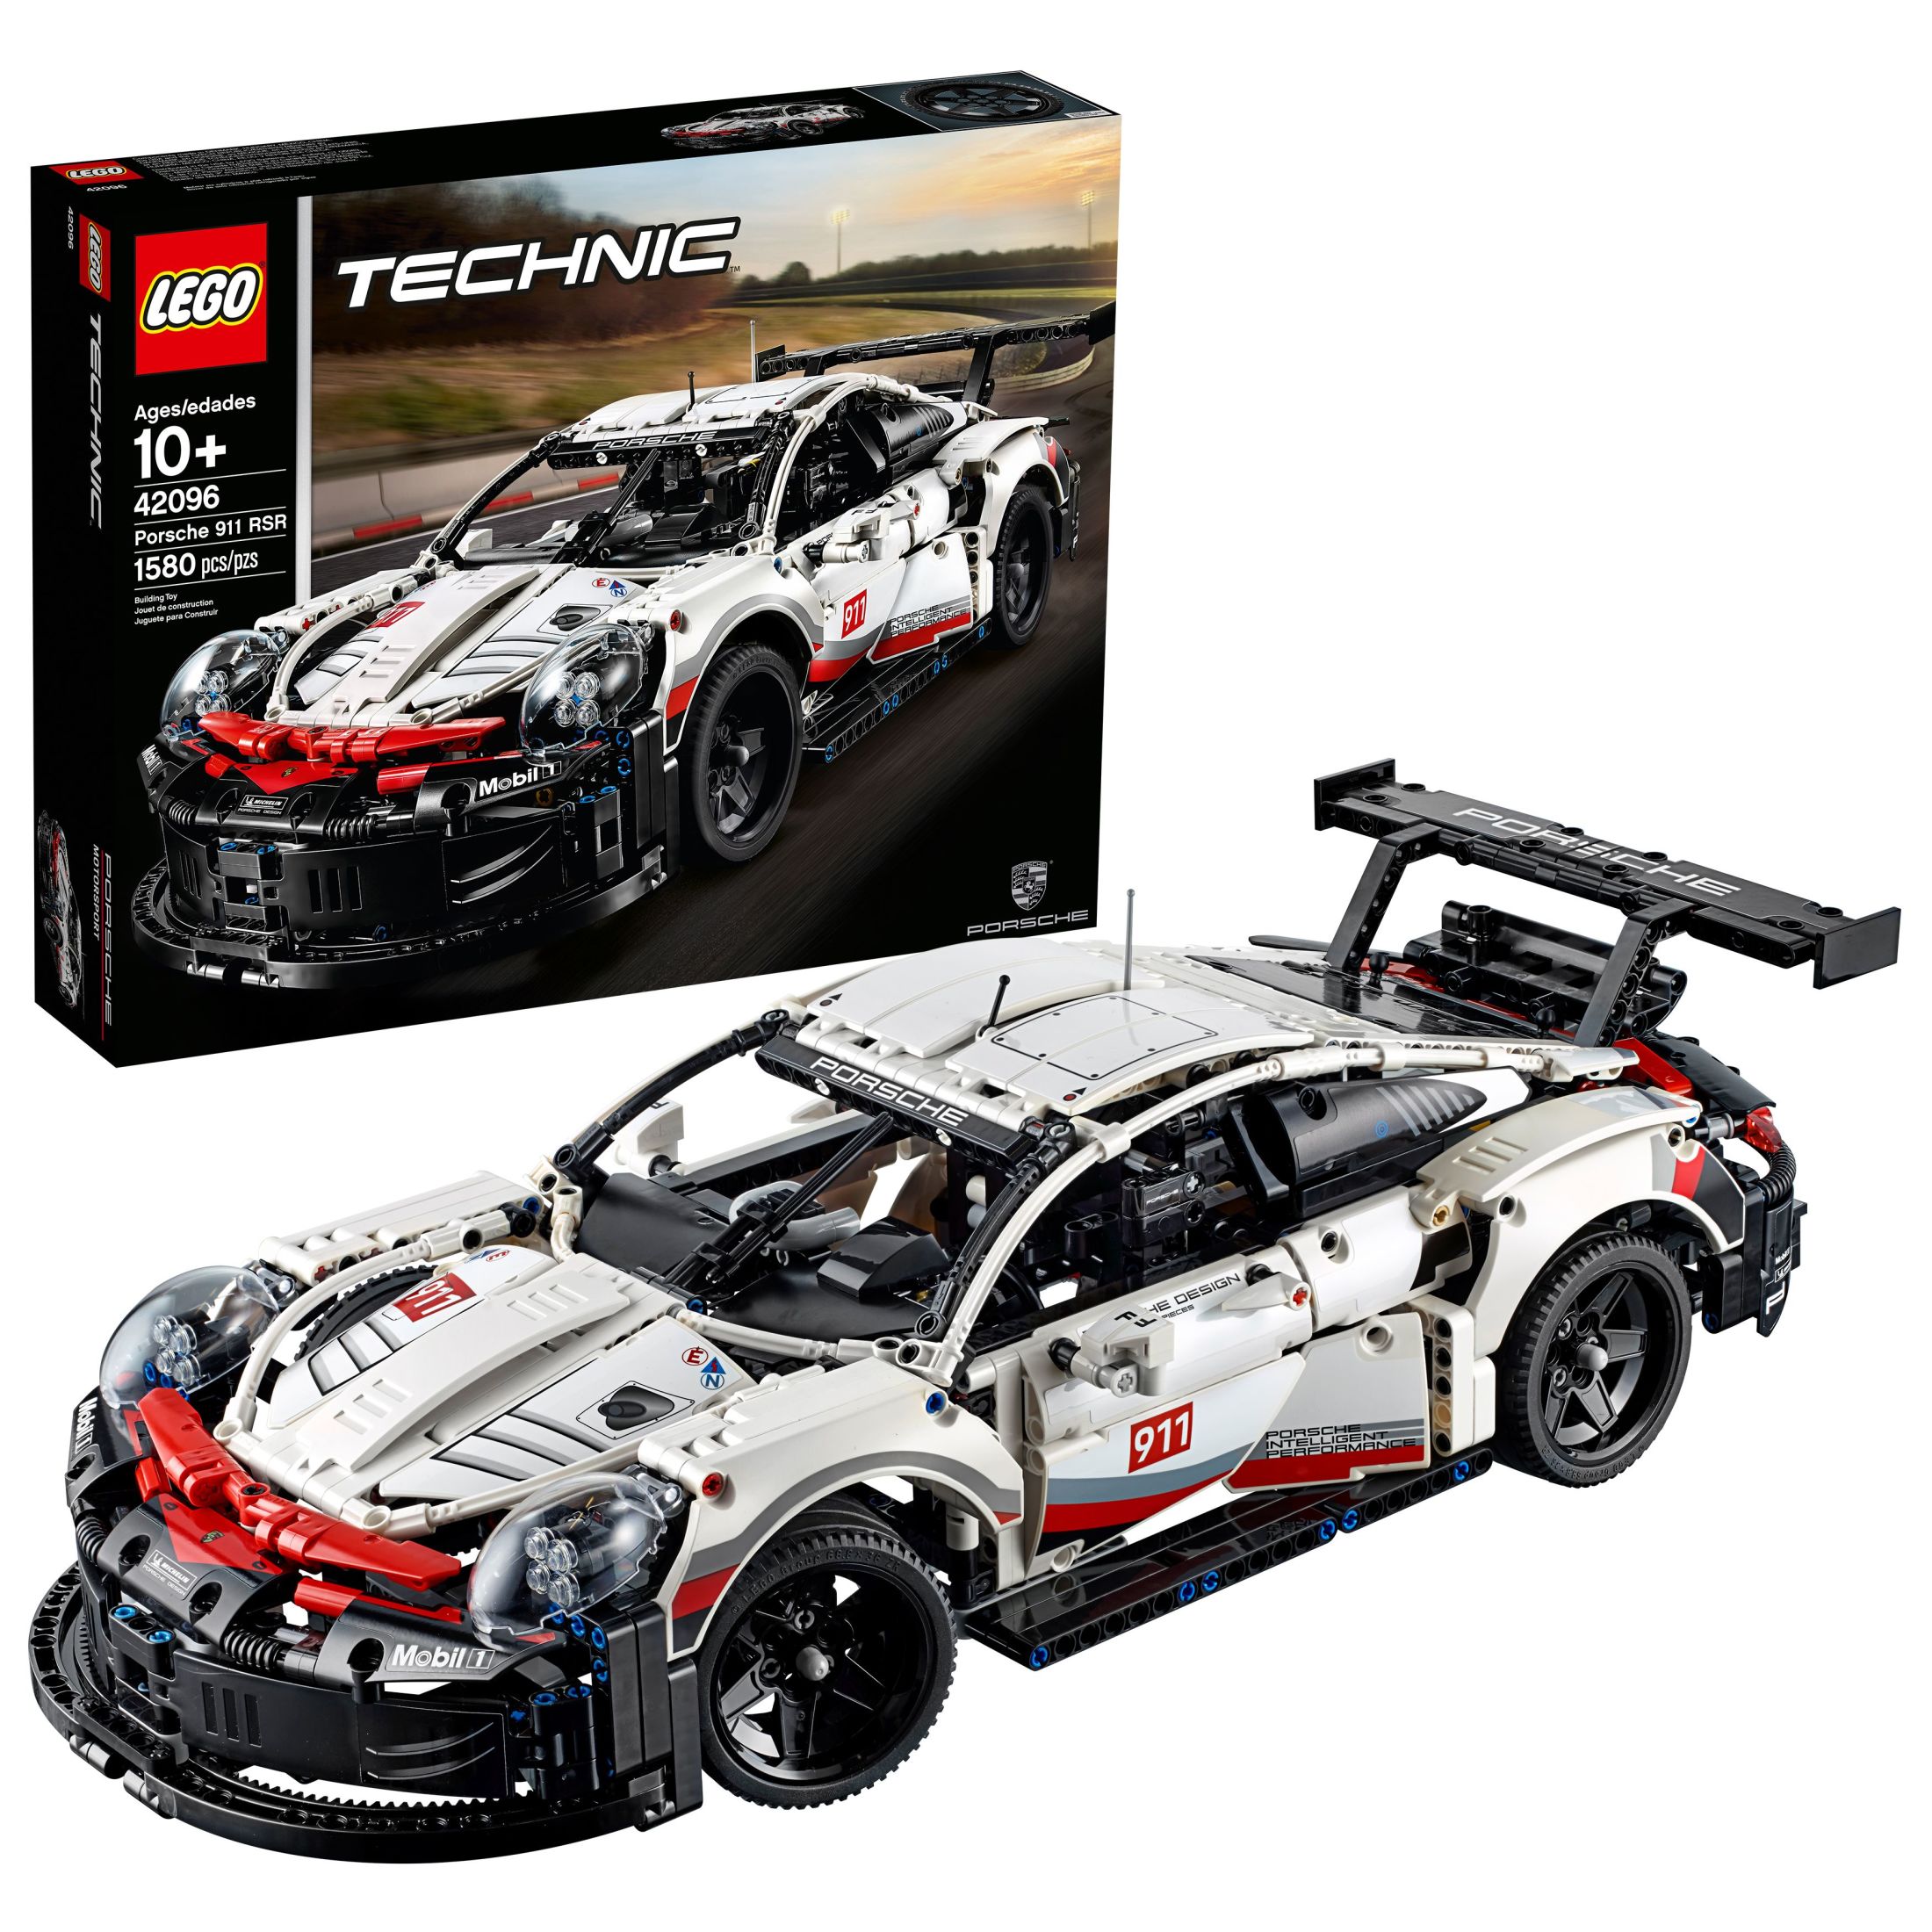 LEGO Technic Porsche 911 RSR Race Car Model Building Kit 42096, Advanced Replica, Exclusive Collectible Set, Gift for Kids, Boys & Girls - image 1 of 9